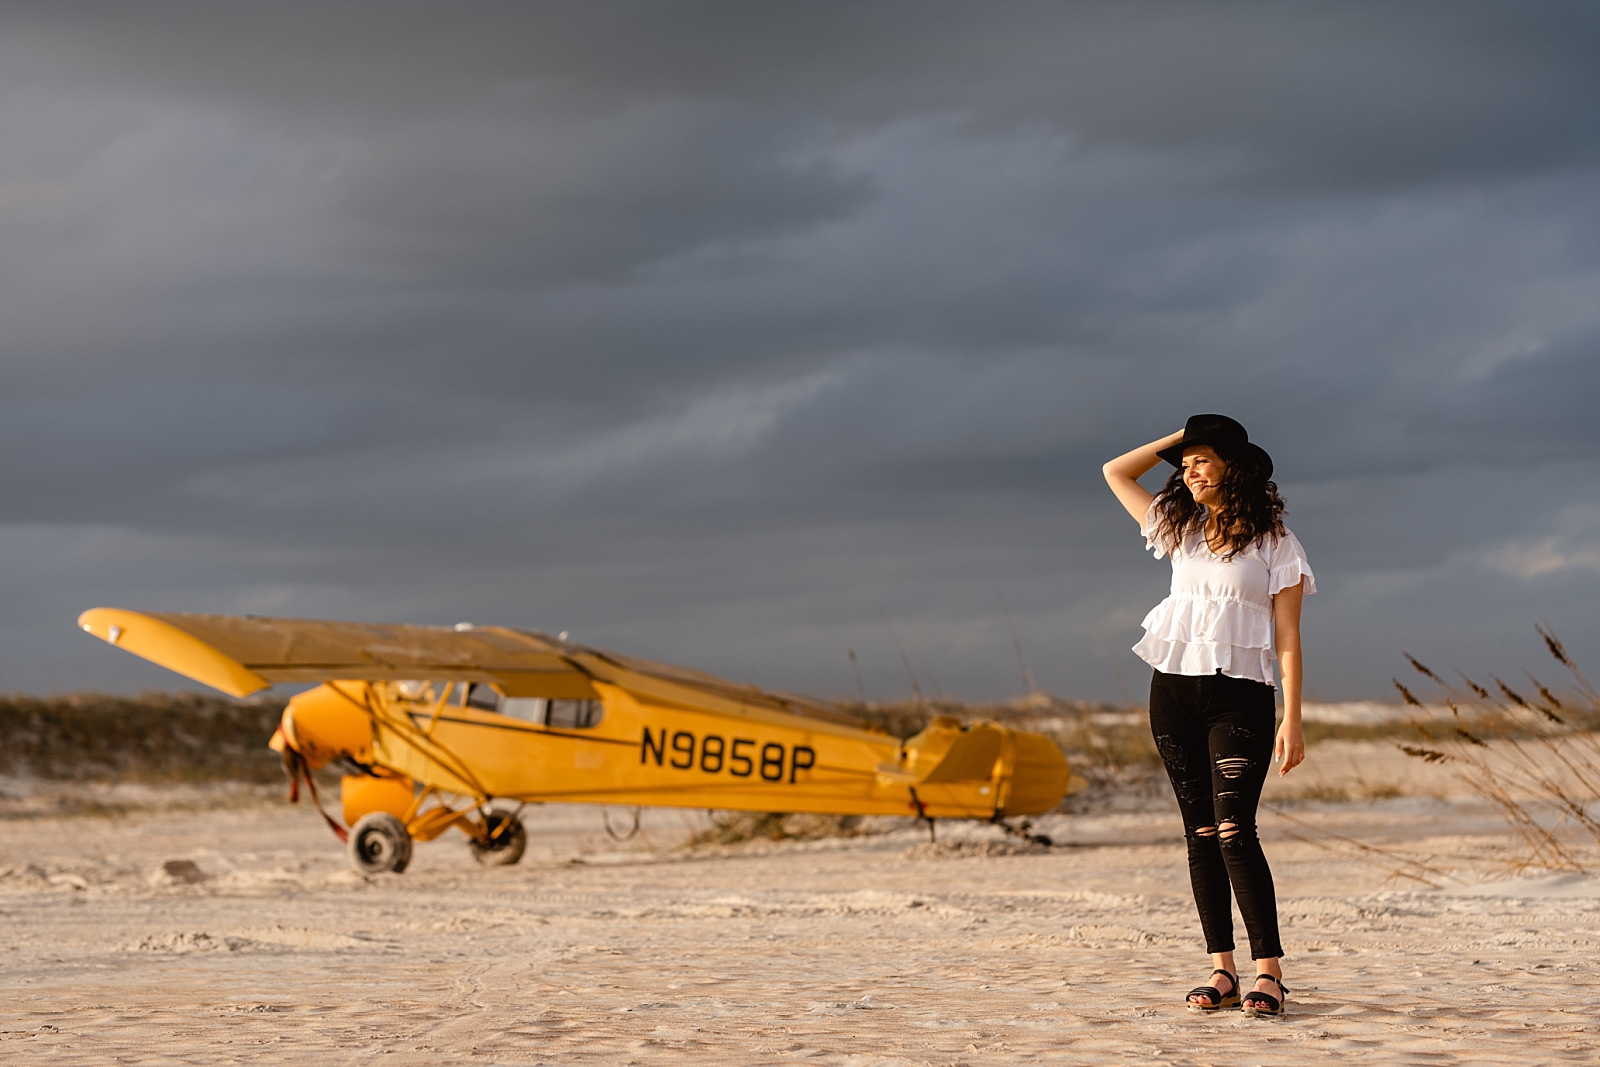 Senior photos on the beach in Florida with airplane and stormclouds in the background.